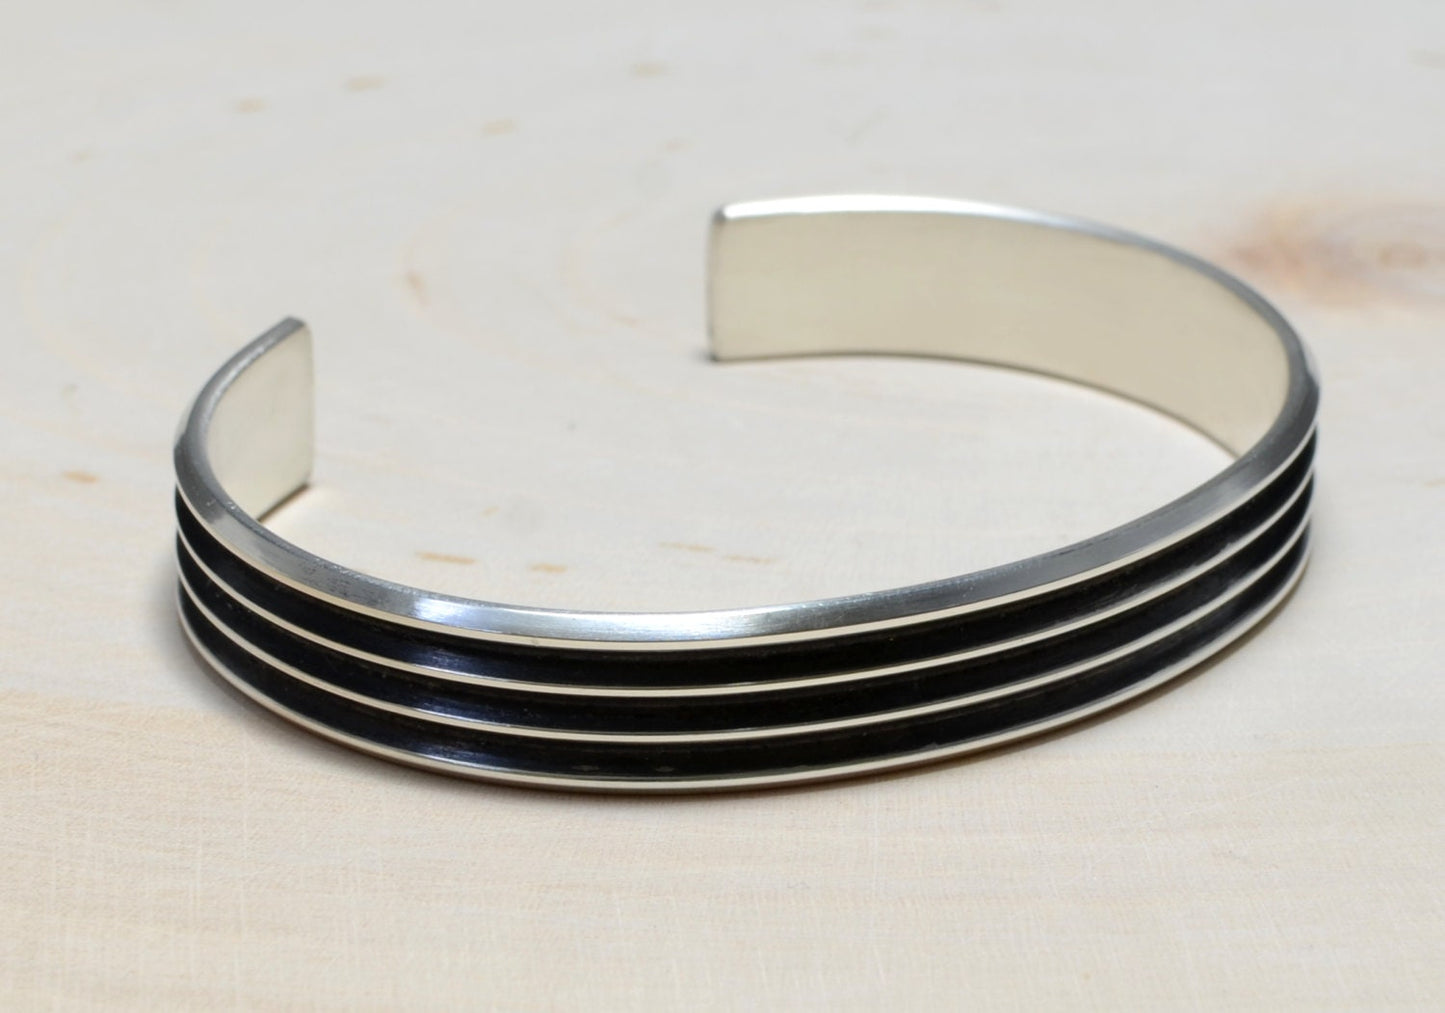 Mens Grooved Sterling Silver Cuff Bracelet served up extra Groovy